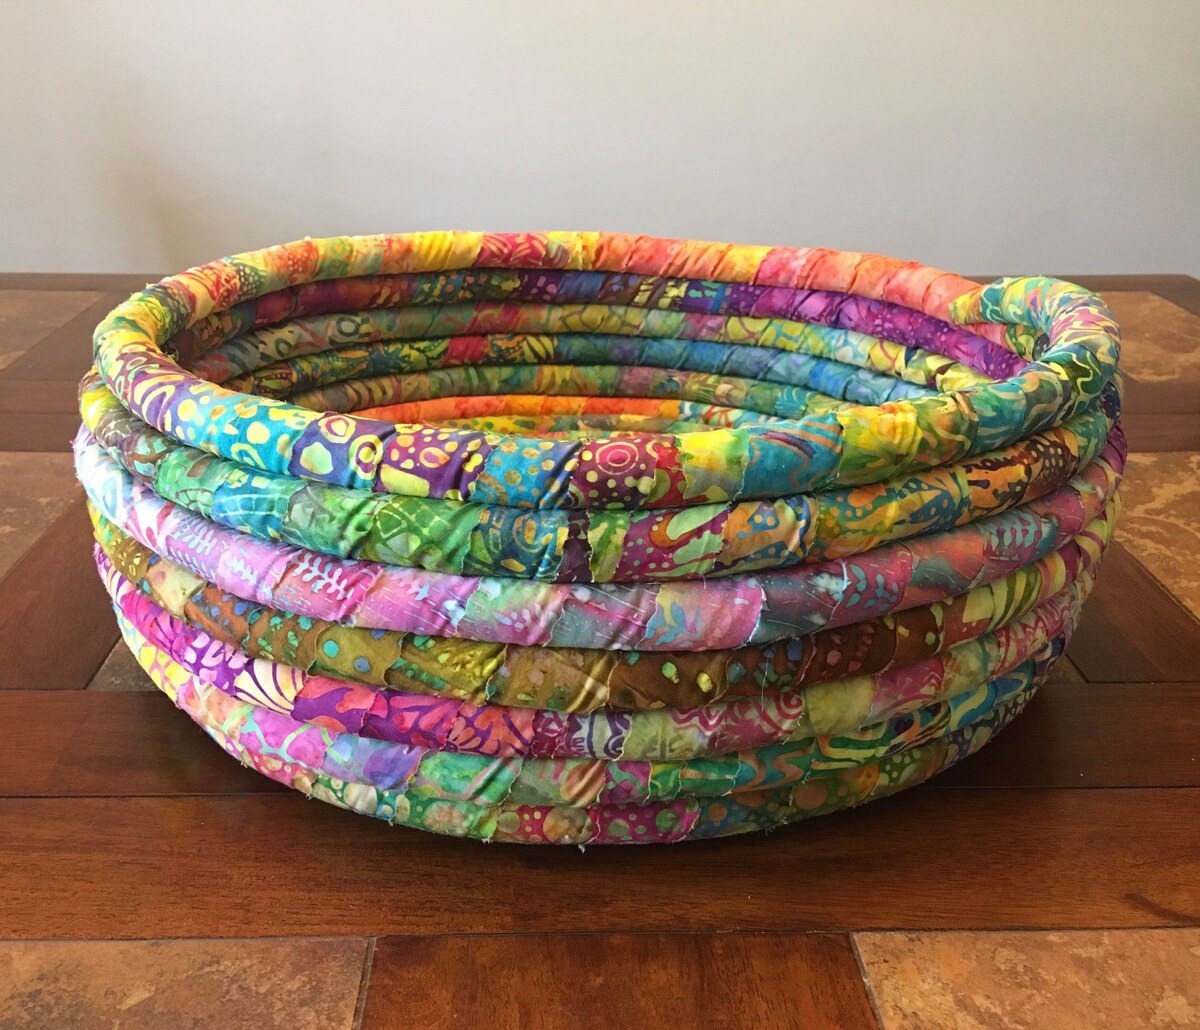 How To Make Coiled Fabric Baskets